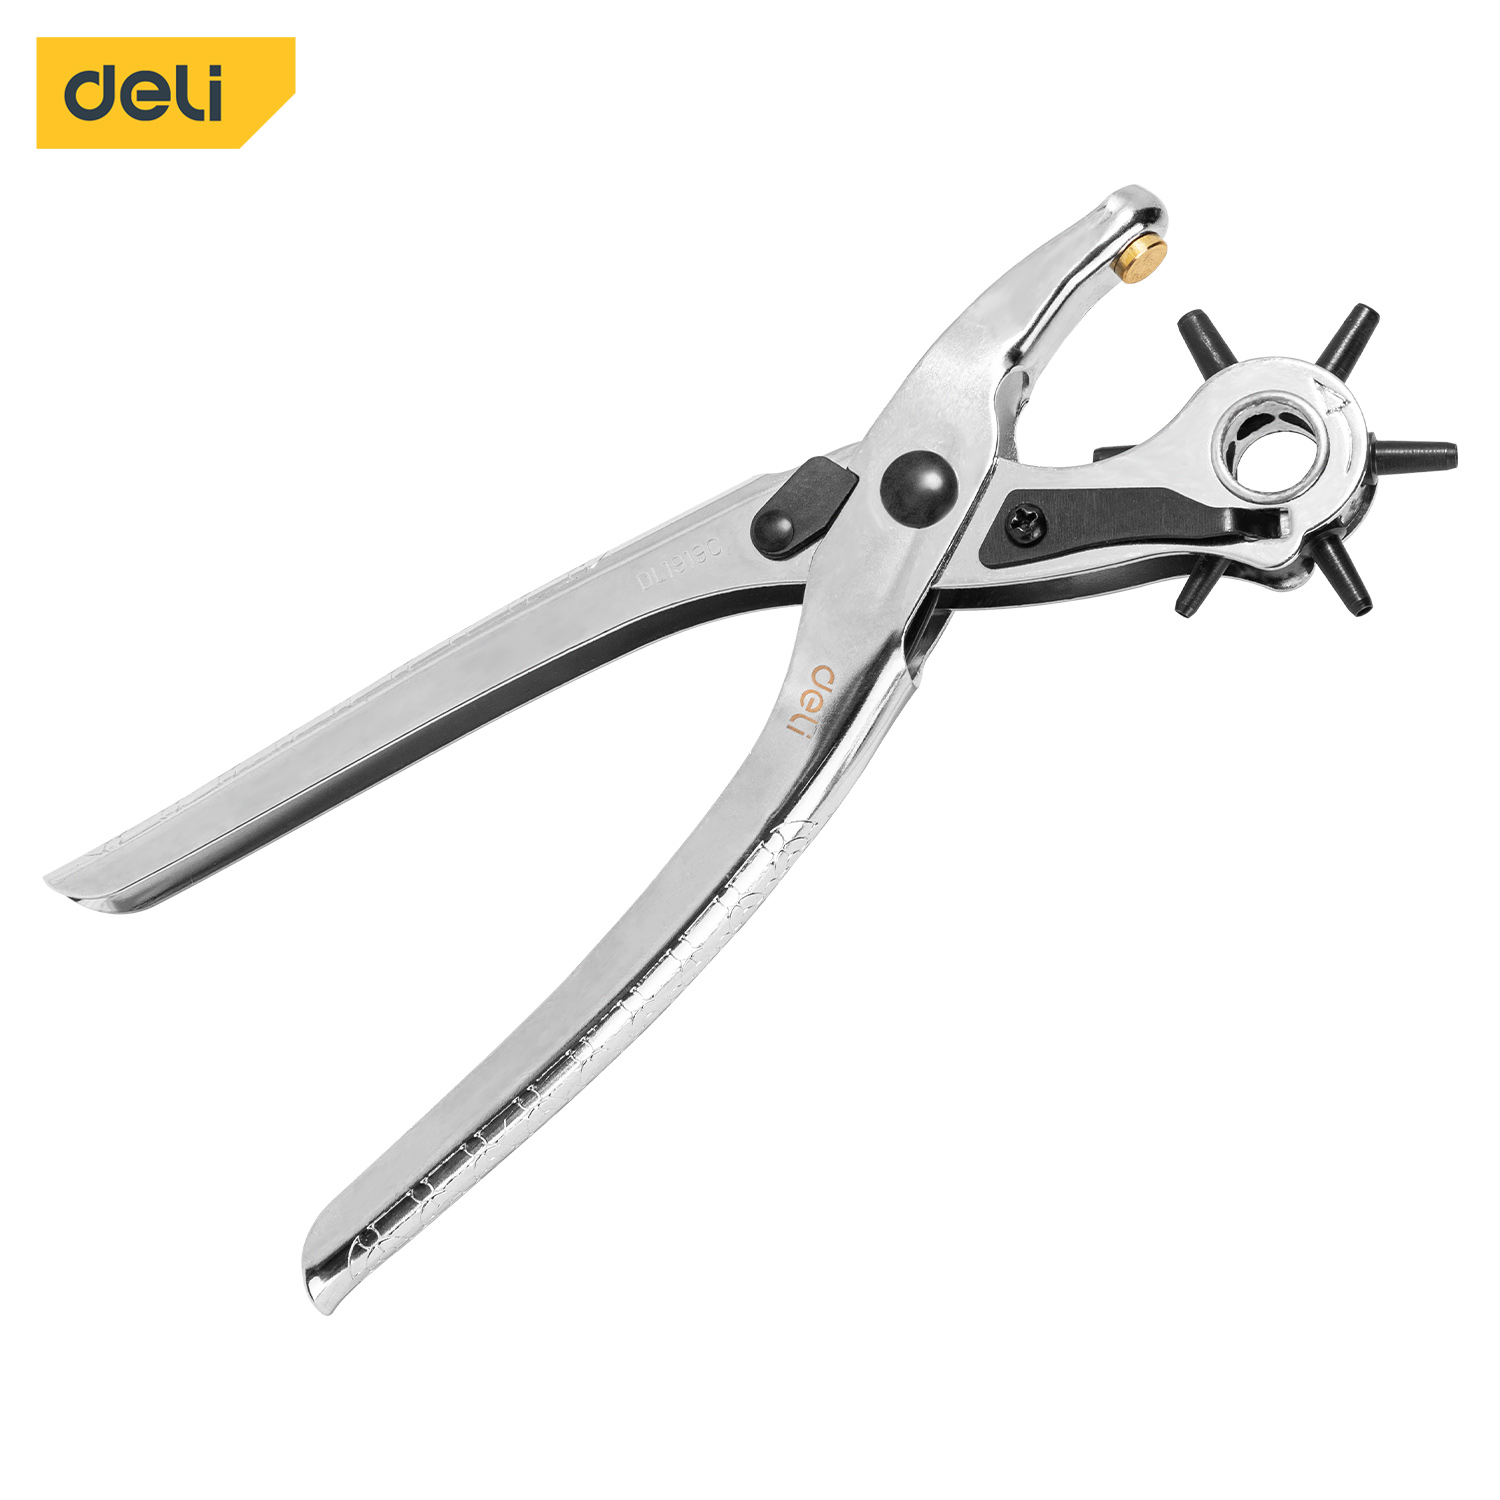 Punch Pliers 9″